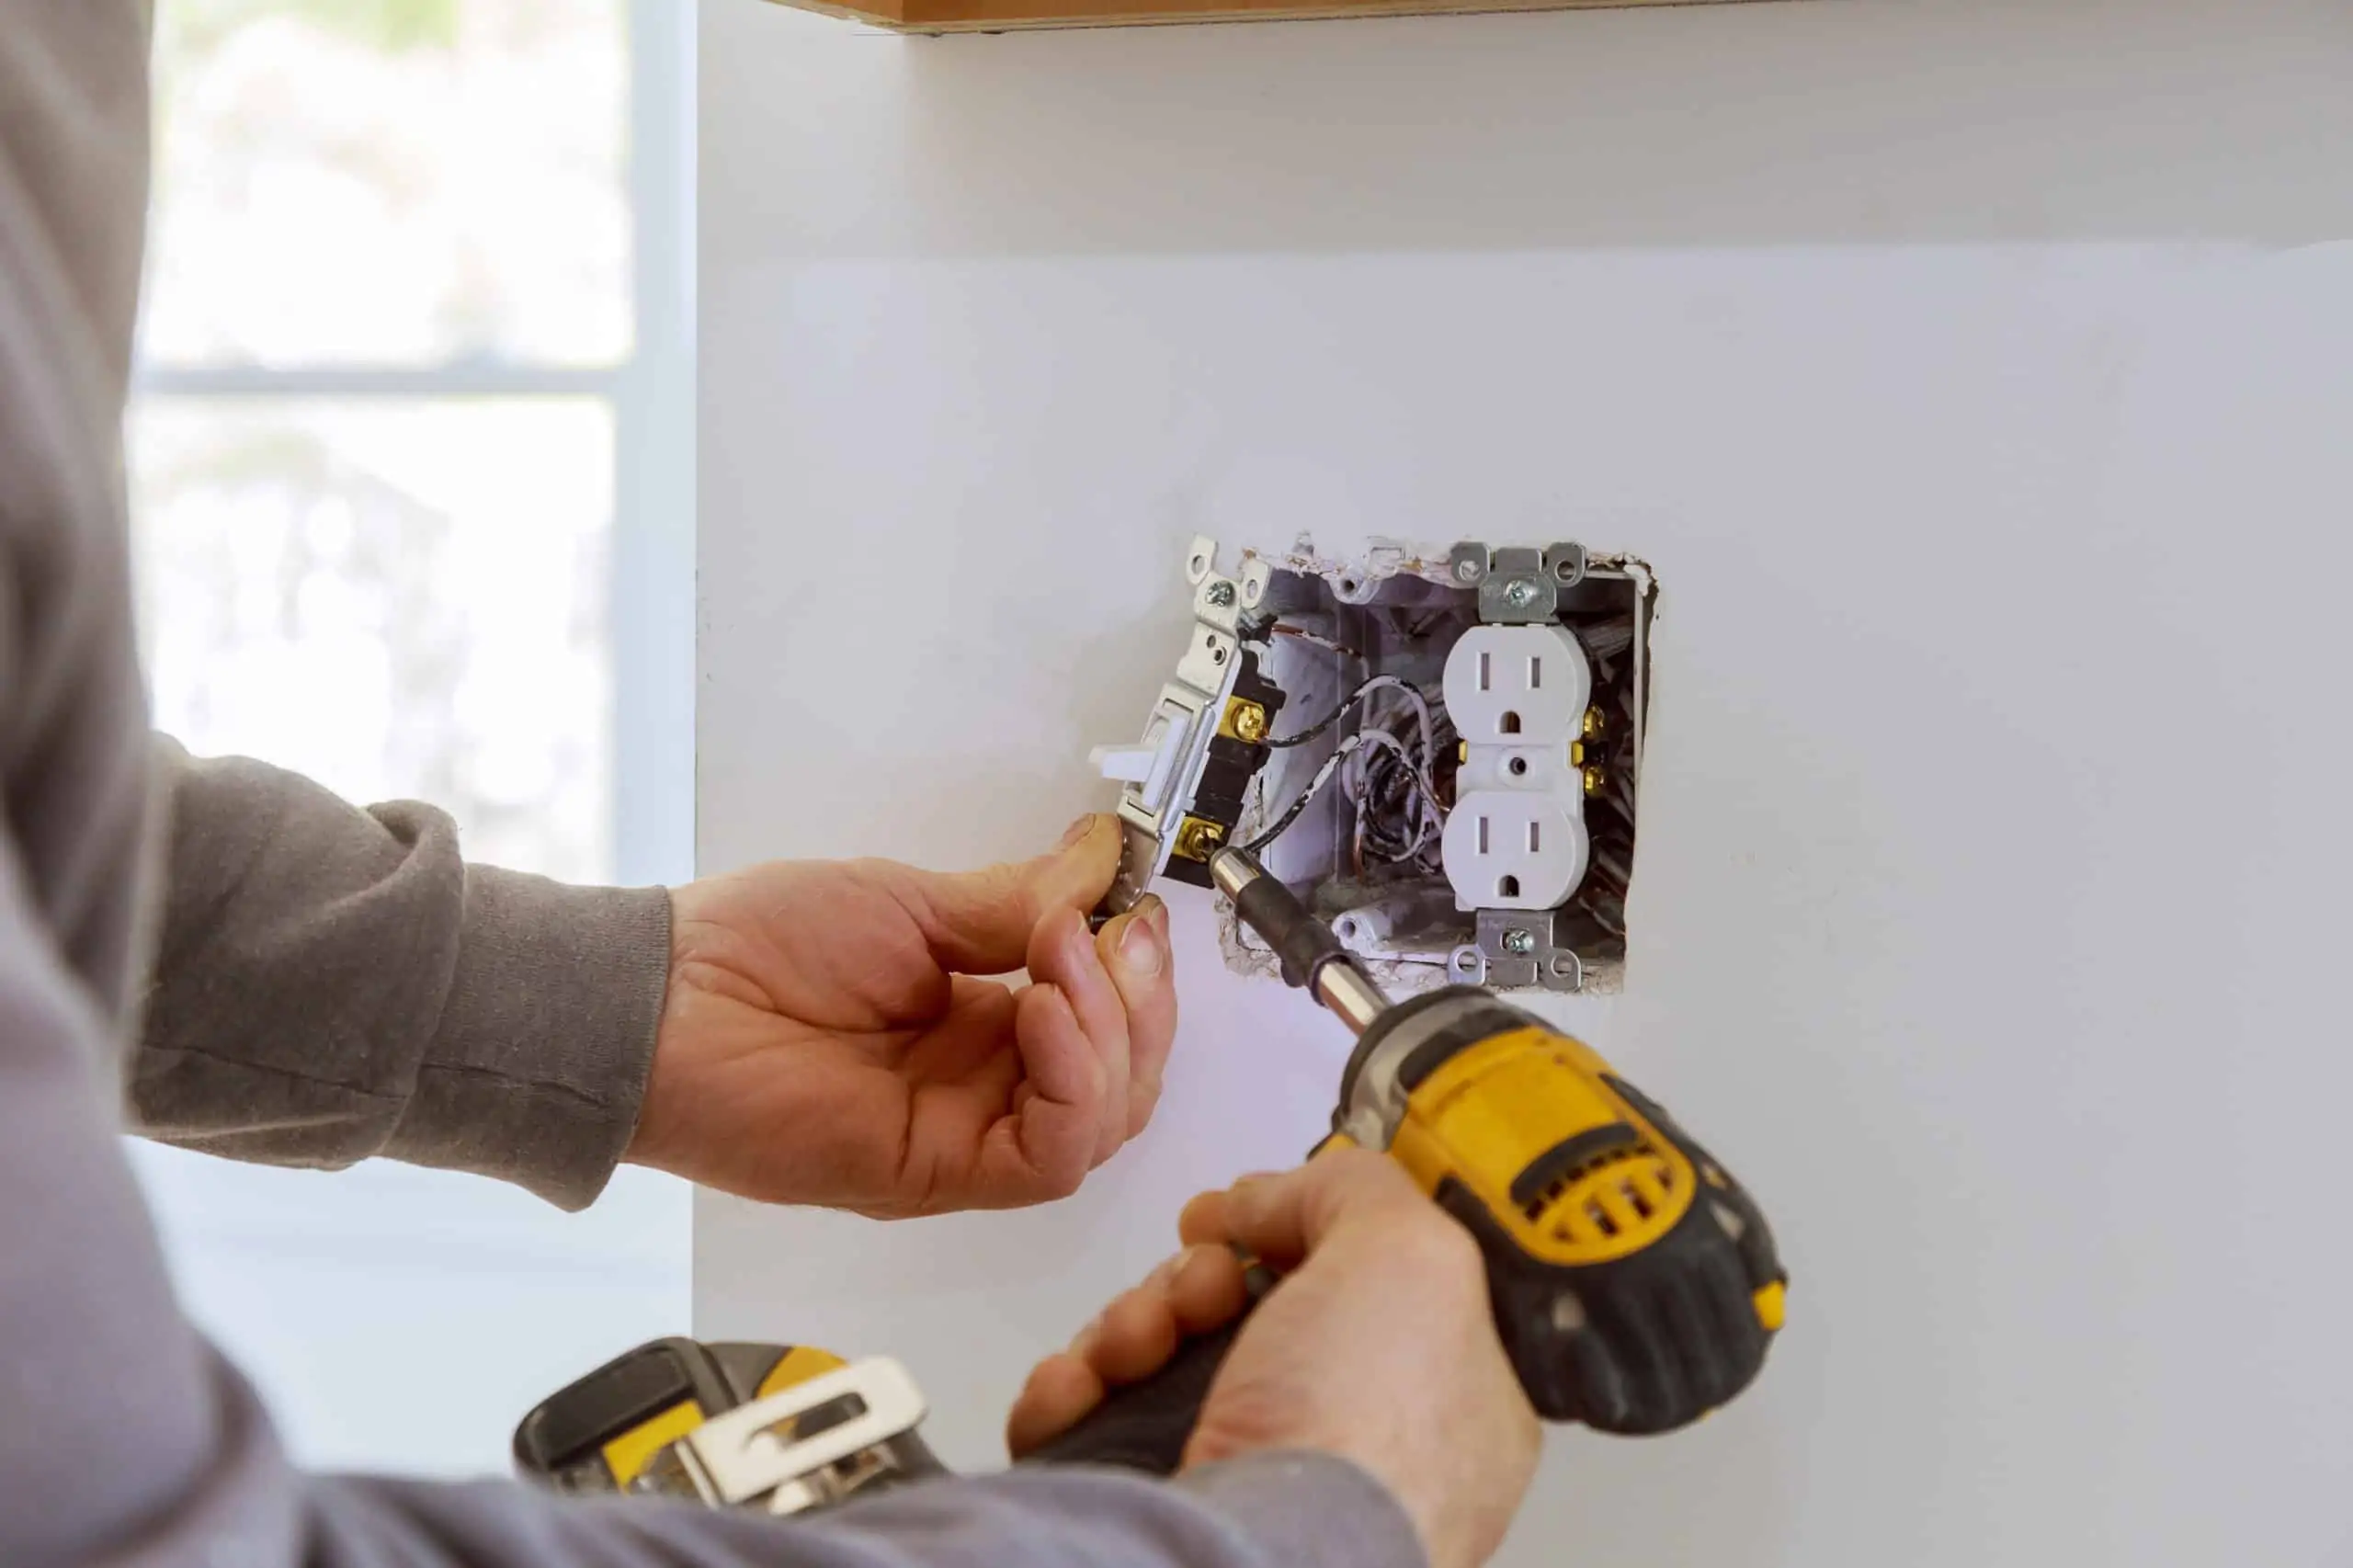 man working on diy outlet installation in his home